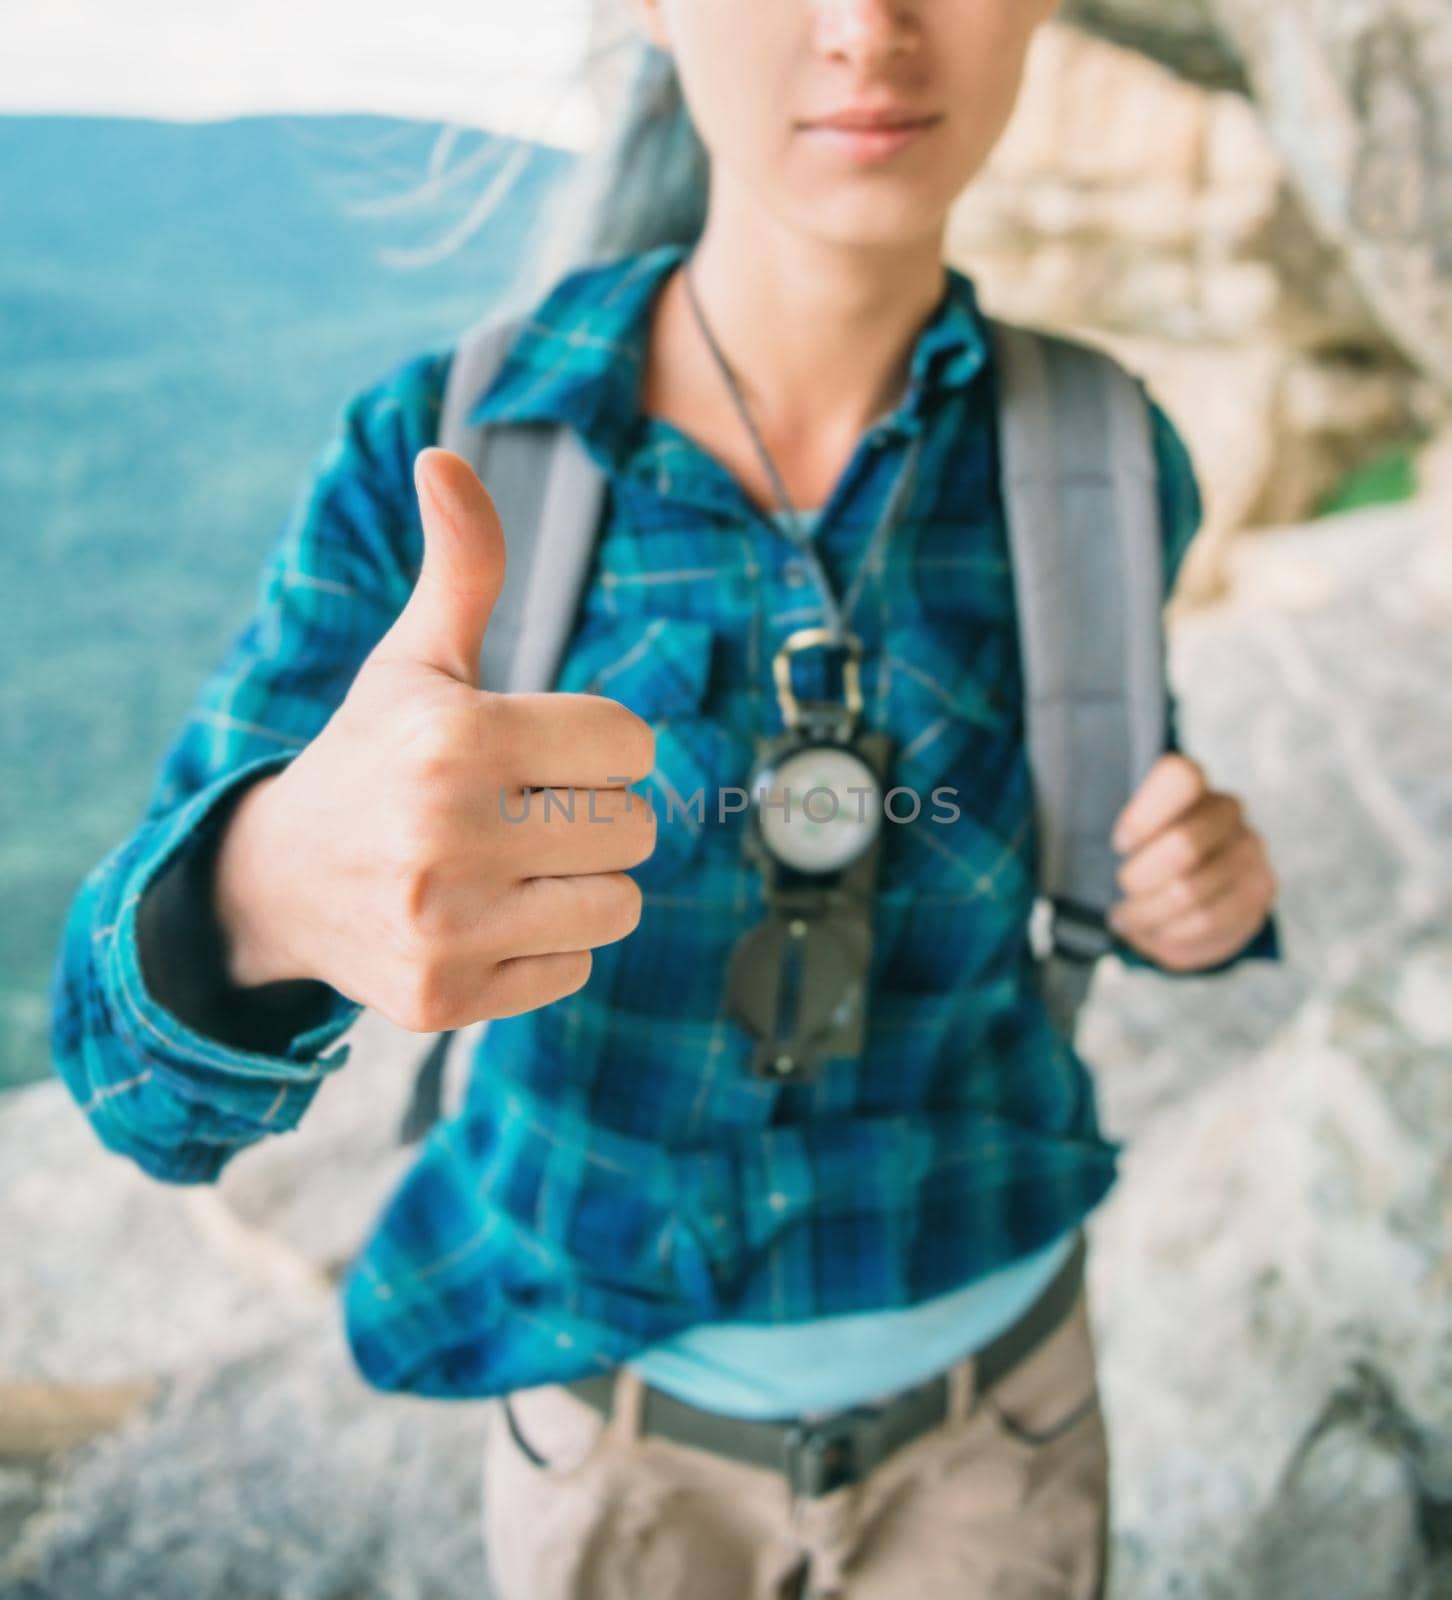 Backpacker young woman with compass showing thumb up gesture outdoor.